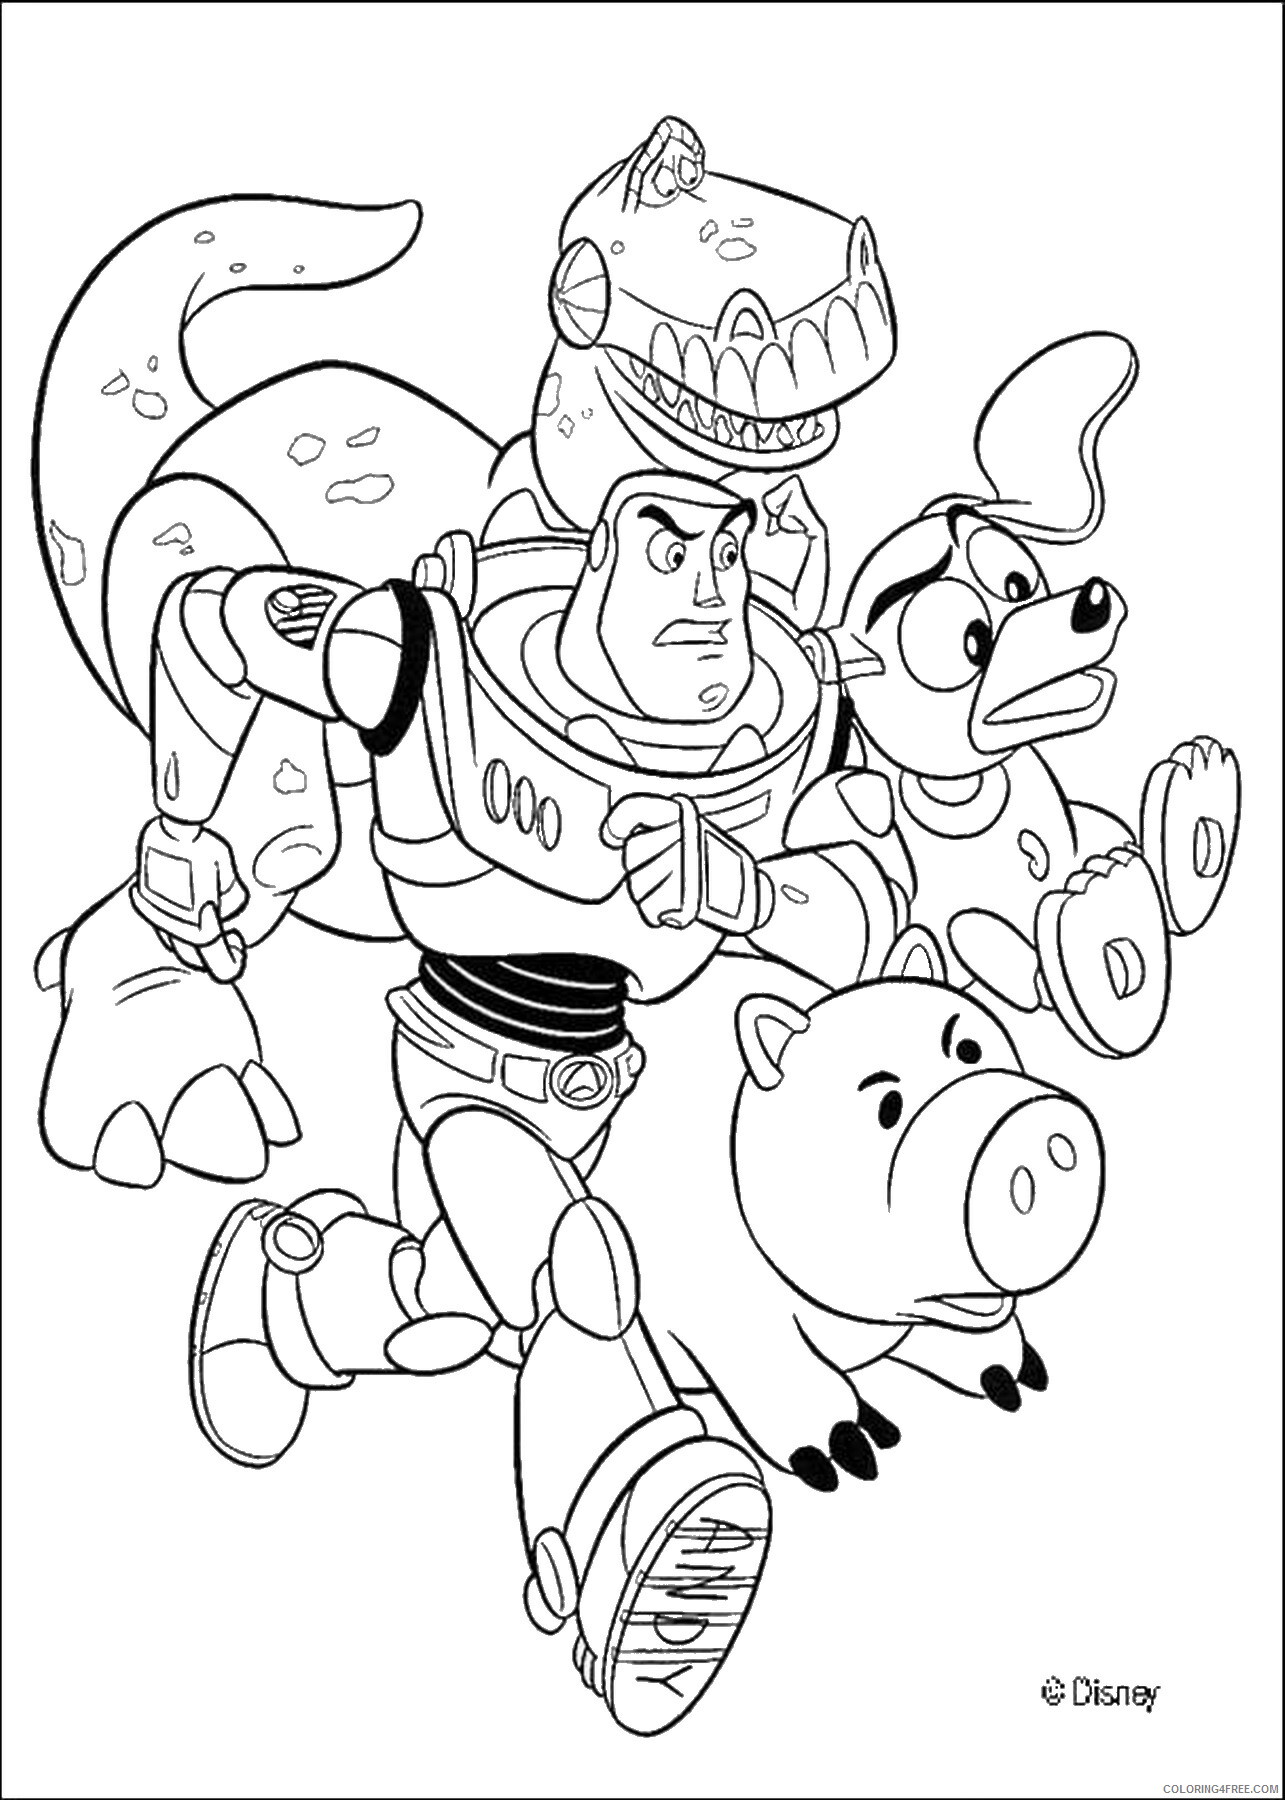 Toy Story Coloring Pages TV Film toystory_24 Printable 2020 10380 Coloring4free